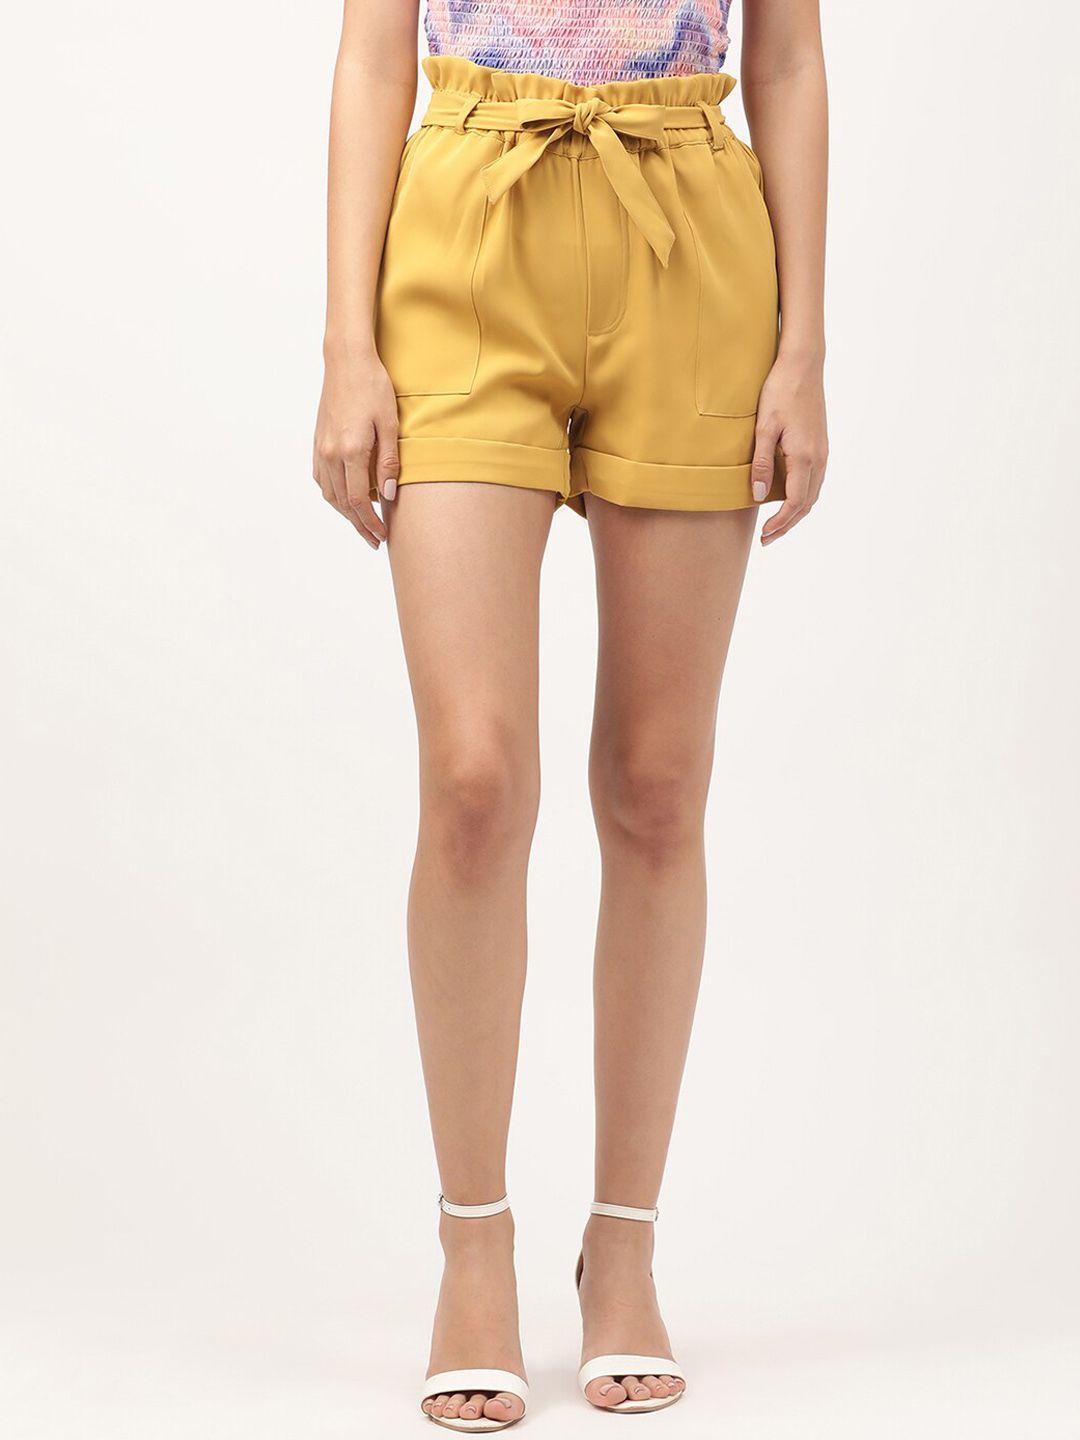 centrestage women yellow solid shorts